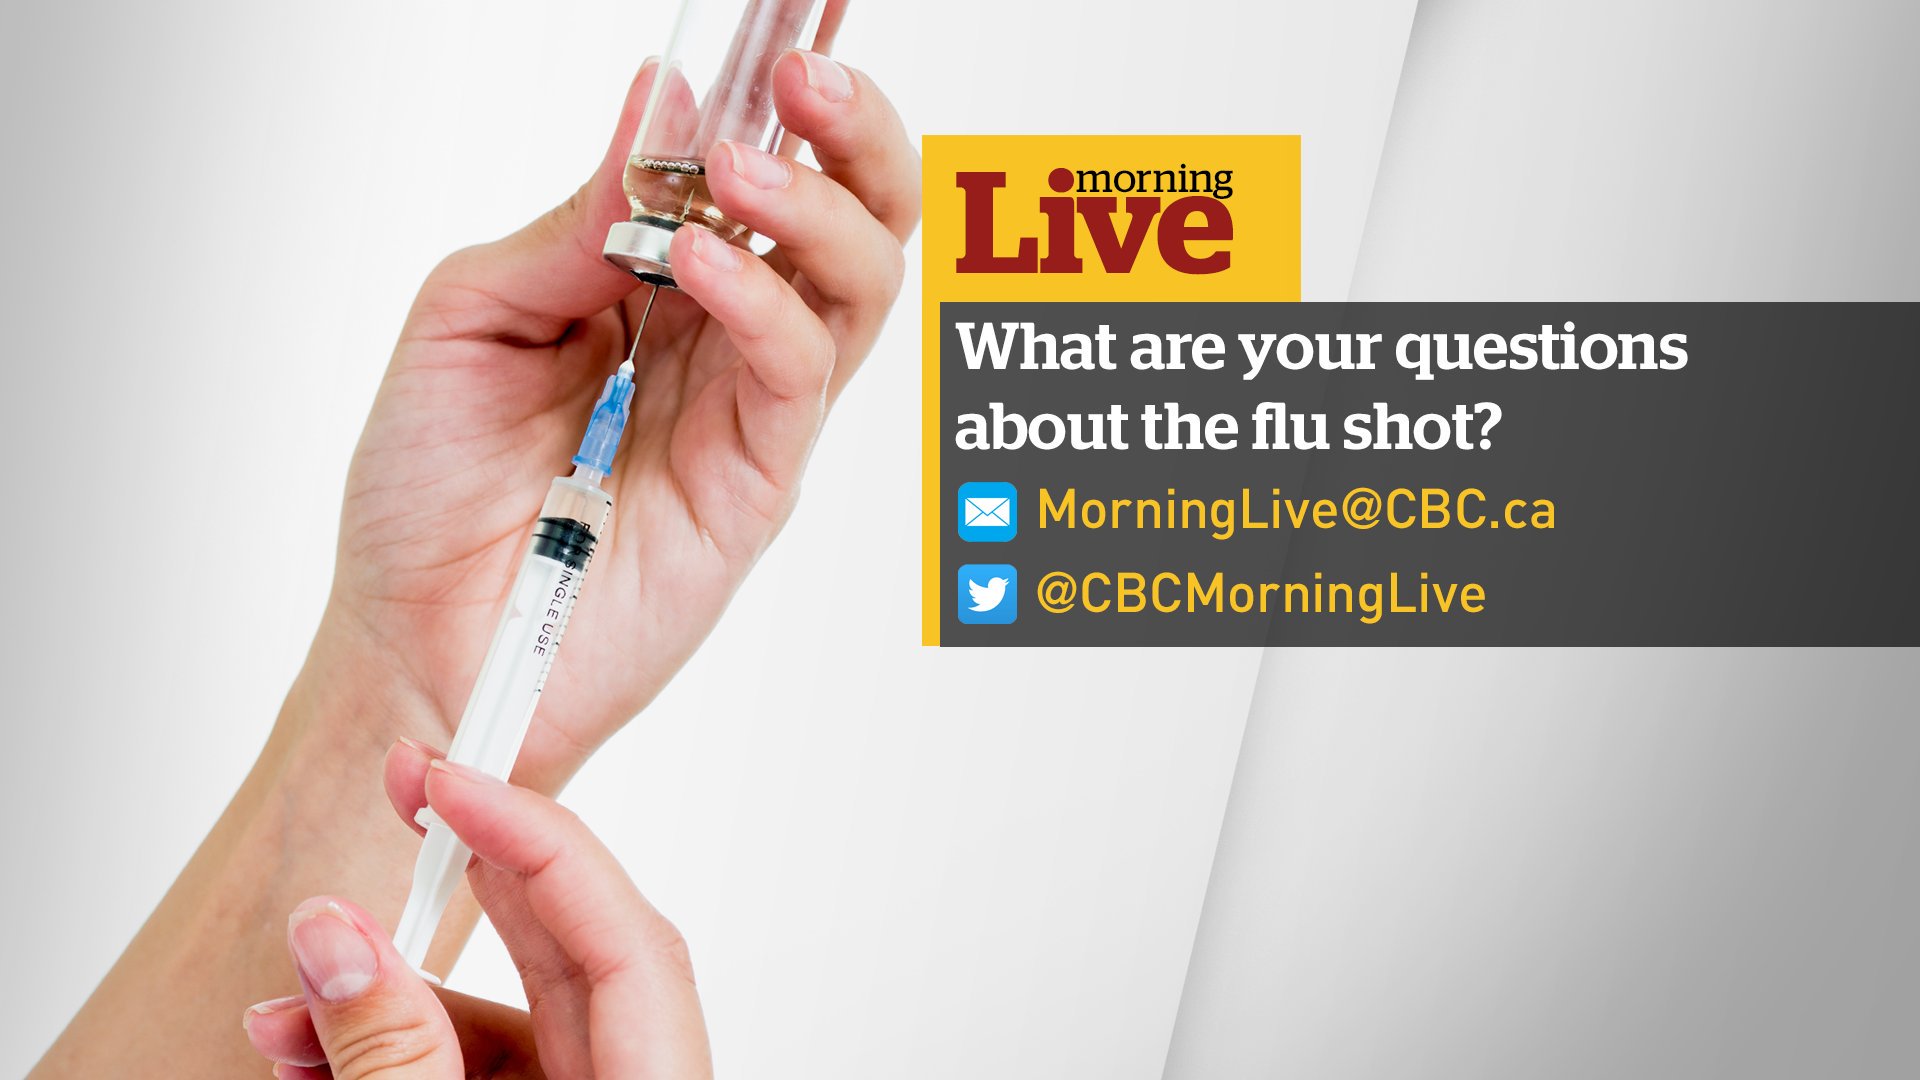 Cbc Morning Live - Writing , HD Wallpaper & Backgrounds